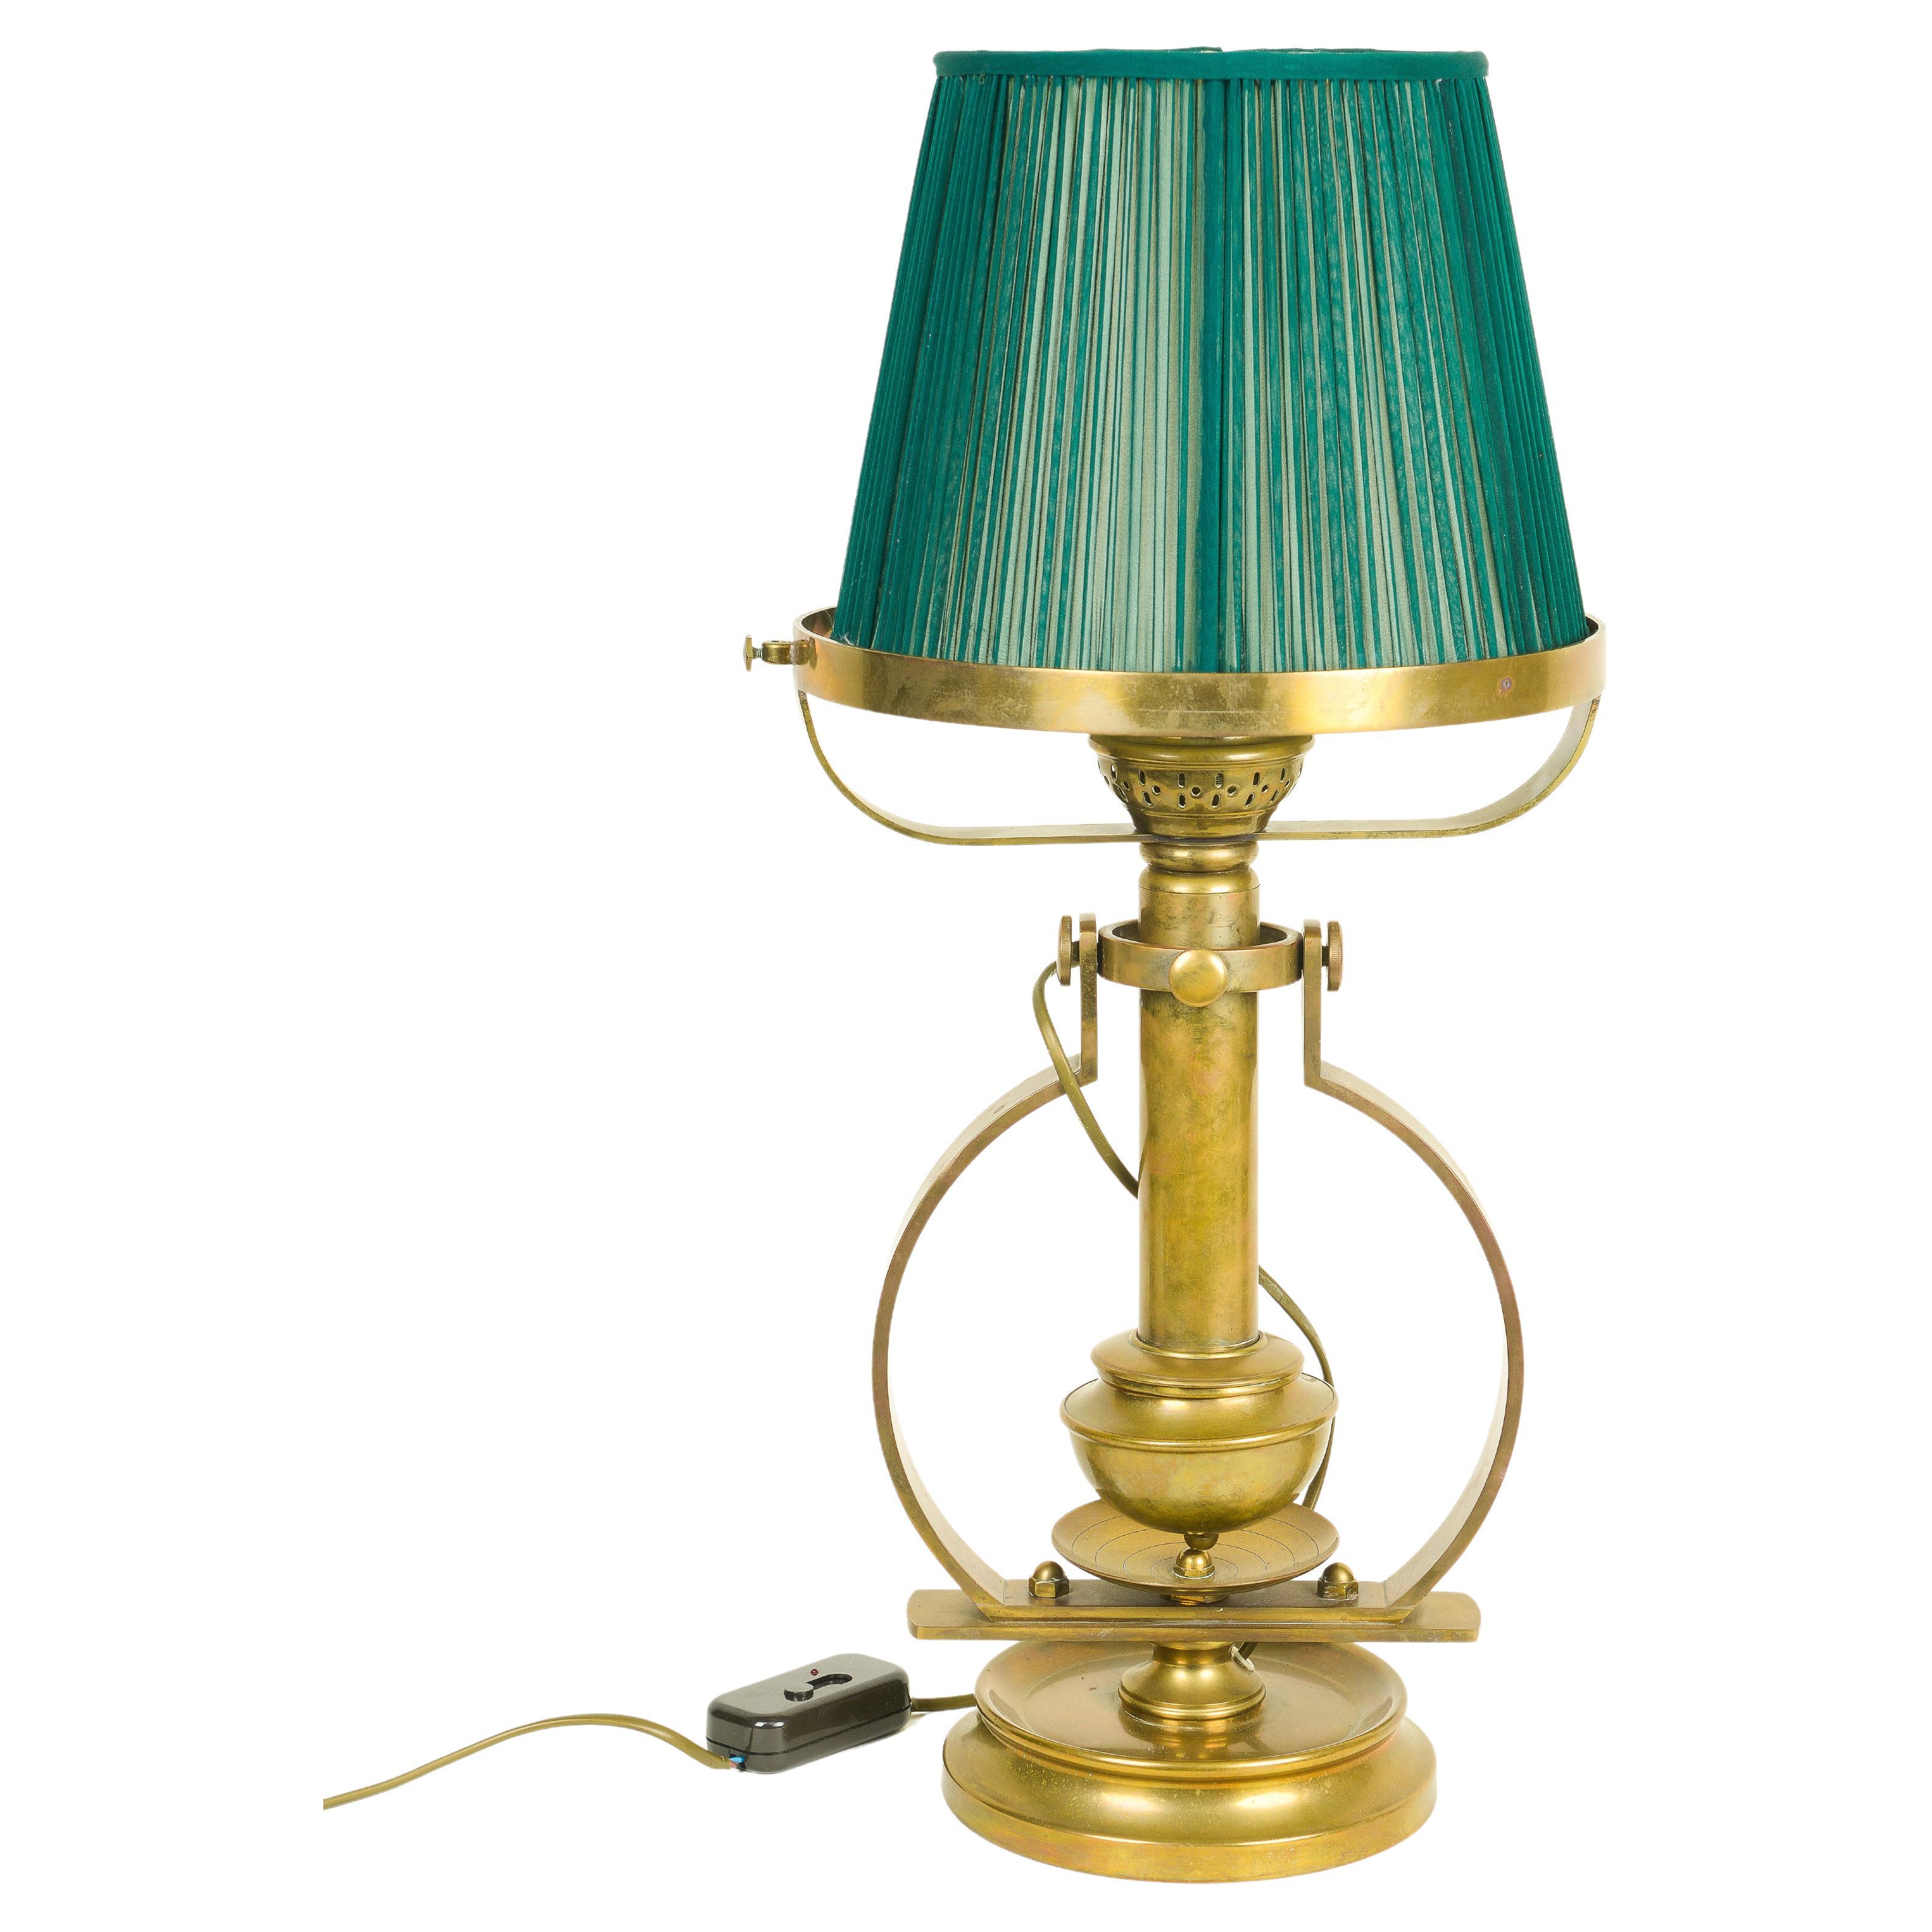 Ship's Electric Solid Brass Gimballed Lamp For Sale